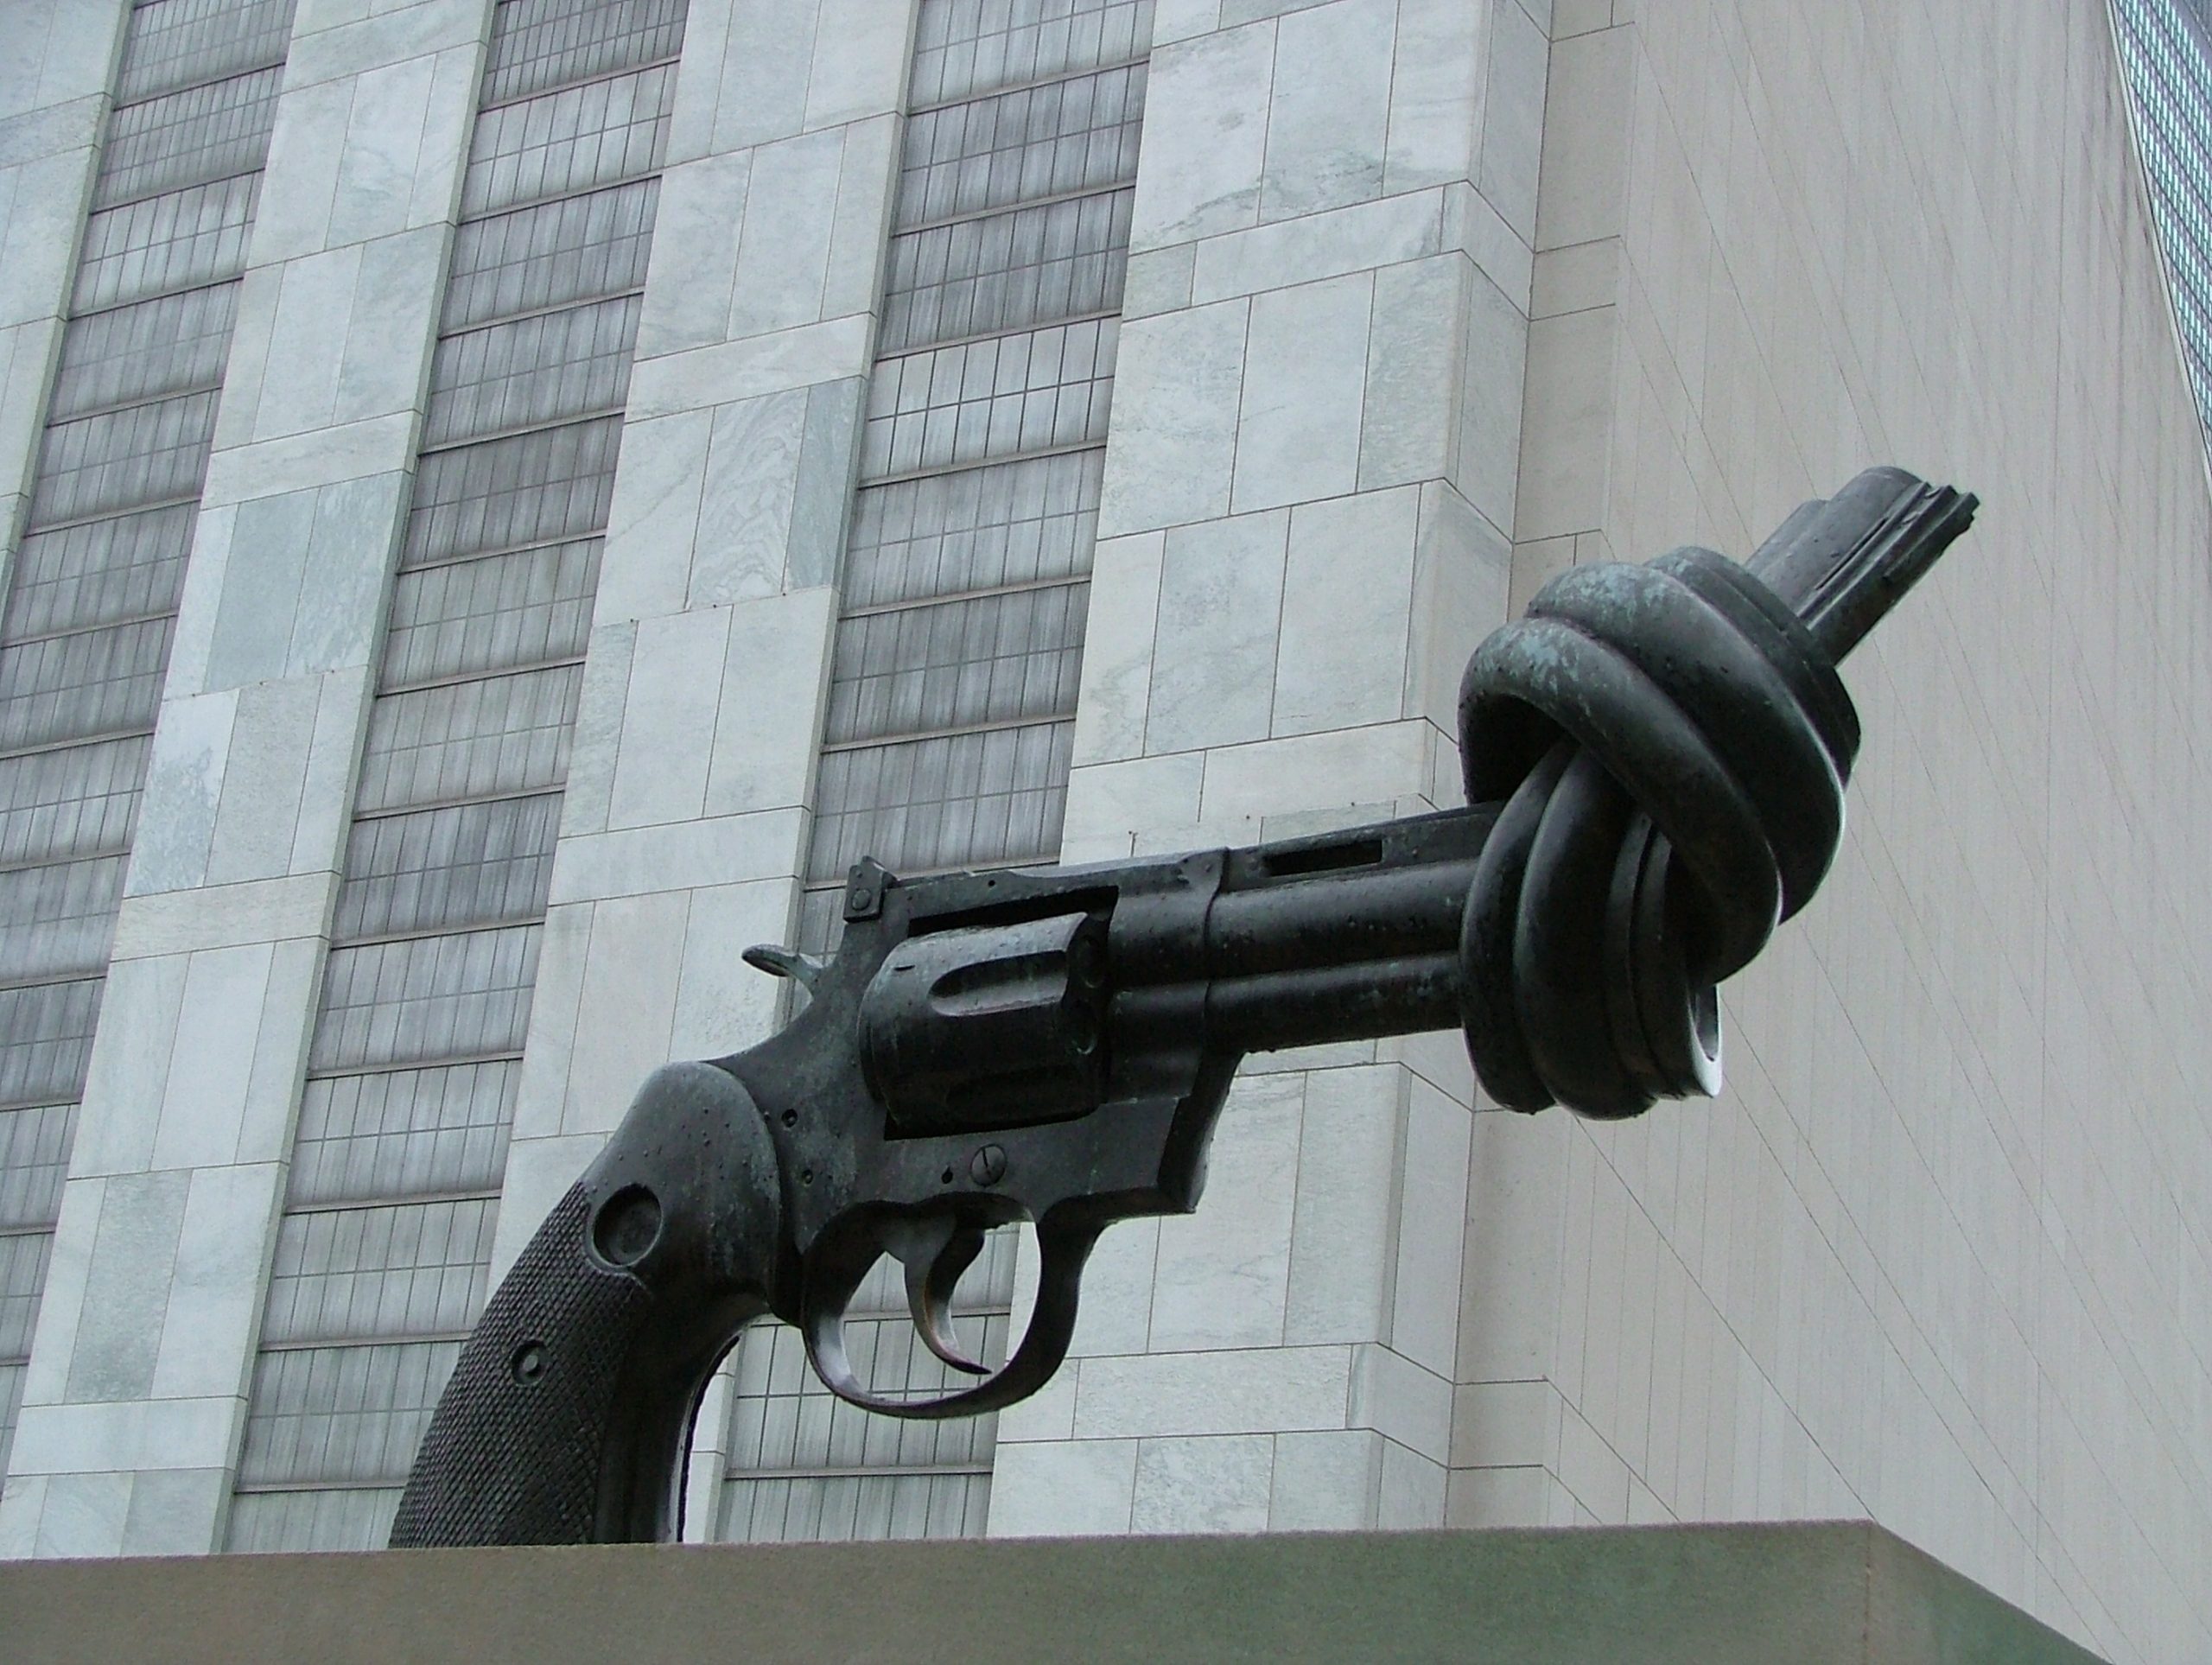 A sculpture of a twisted gun at the United Nations, New York